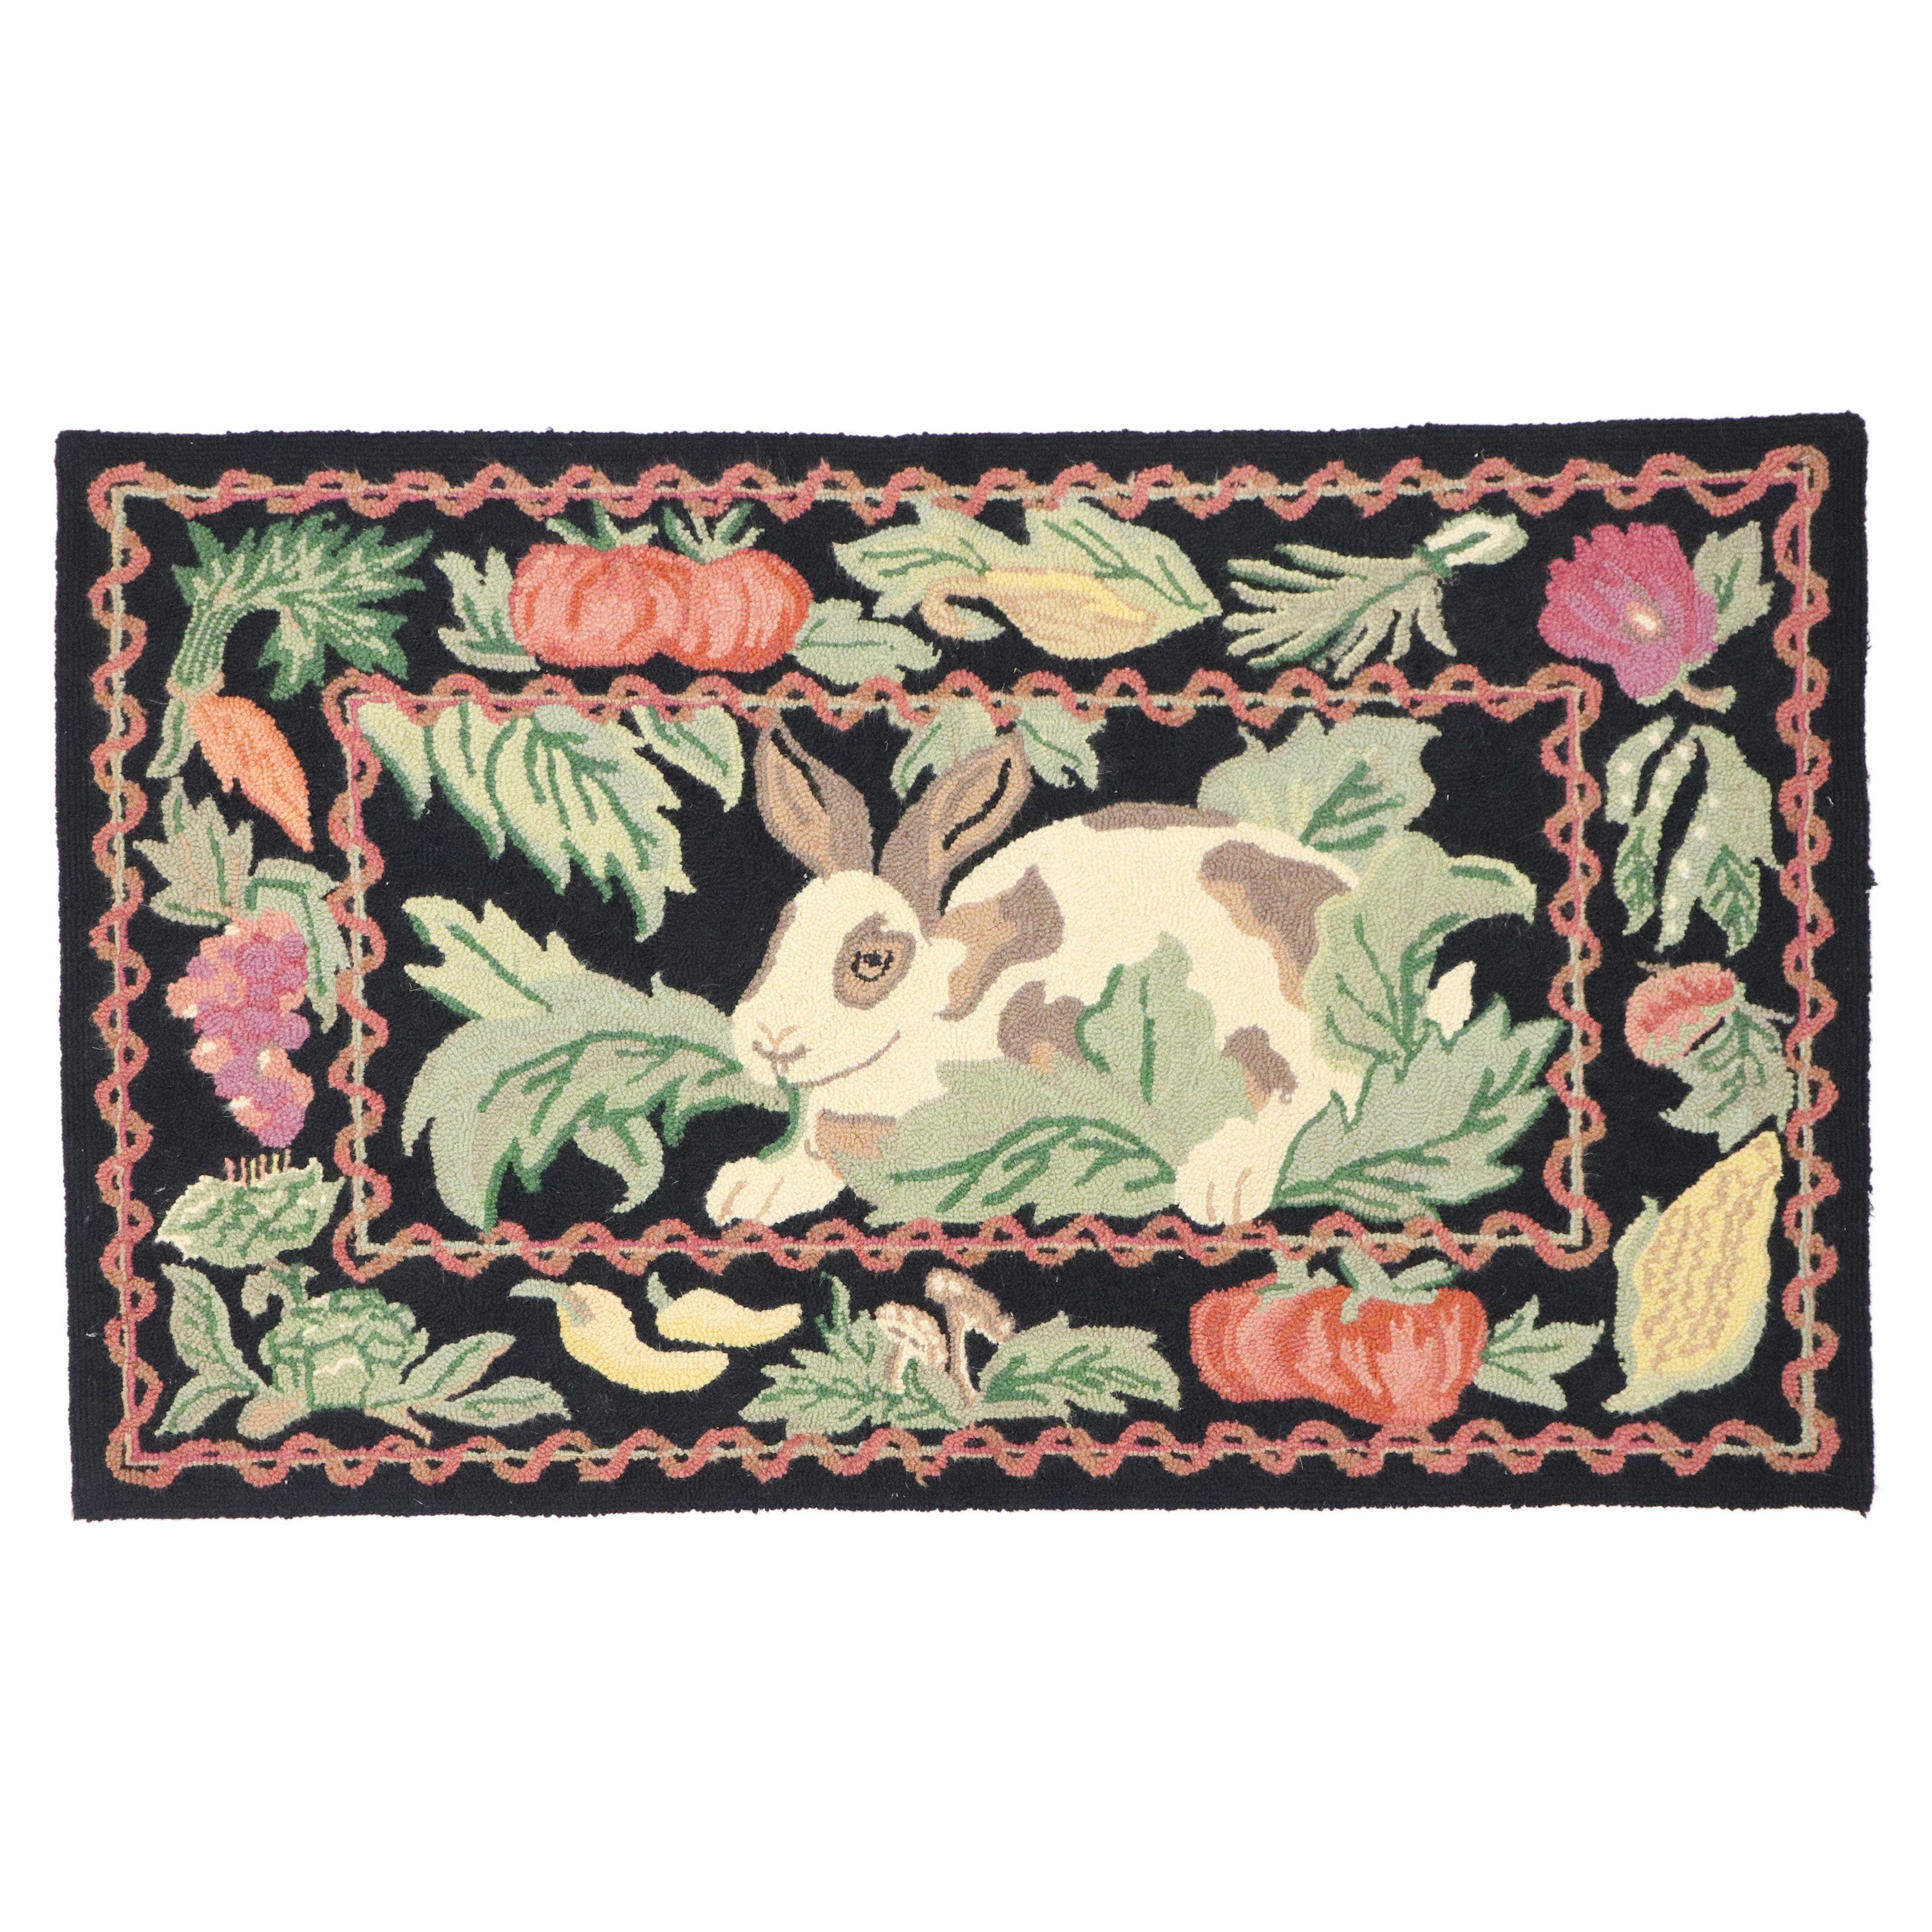 Vintage Garden Rabbit Hooked Rug with French Country Cottage Style